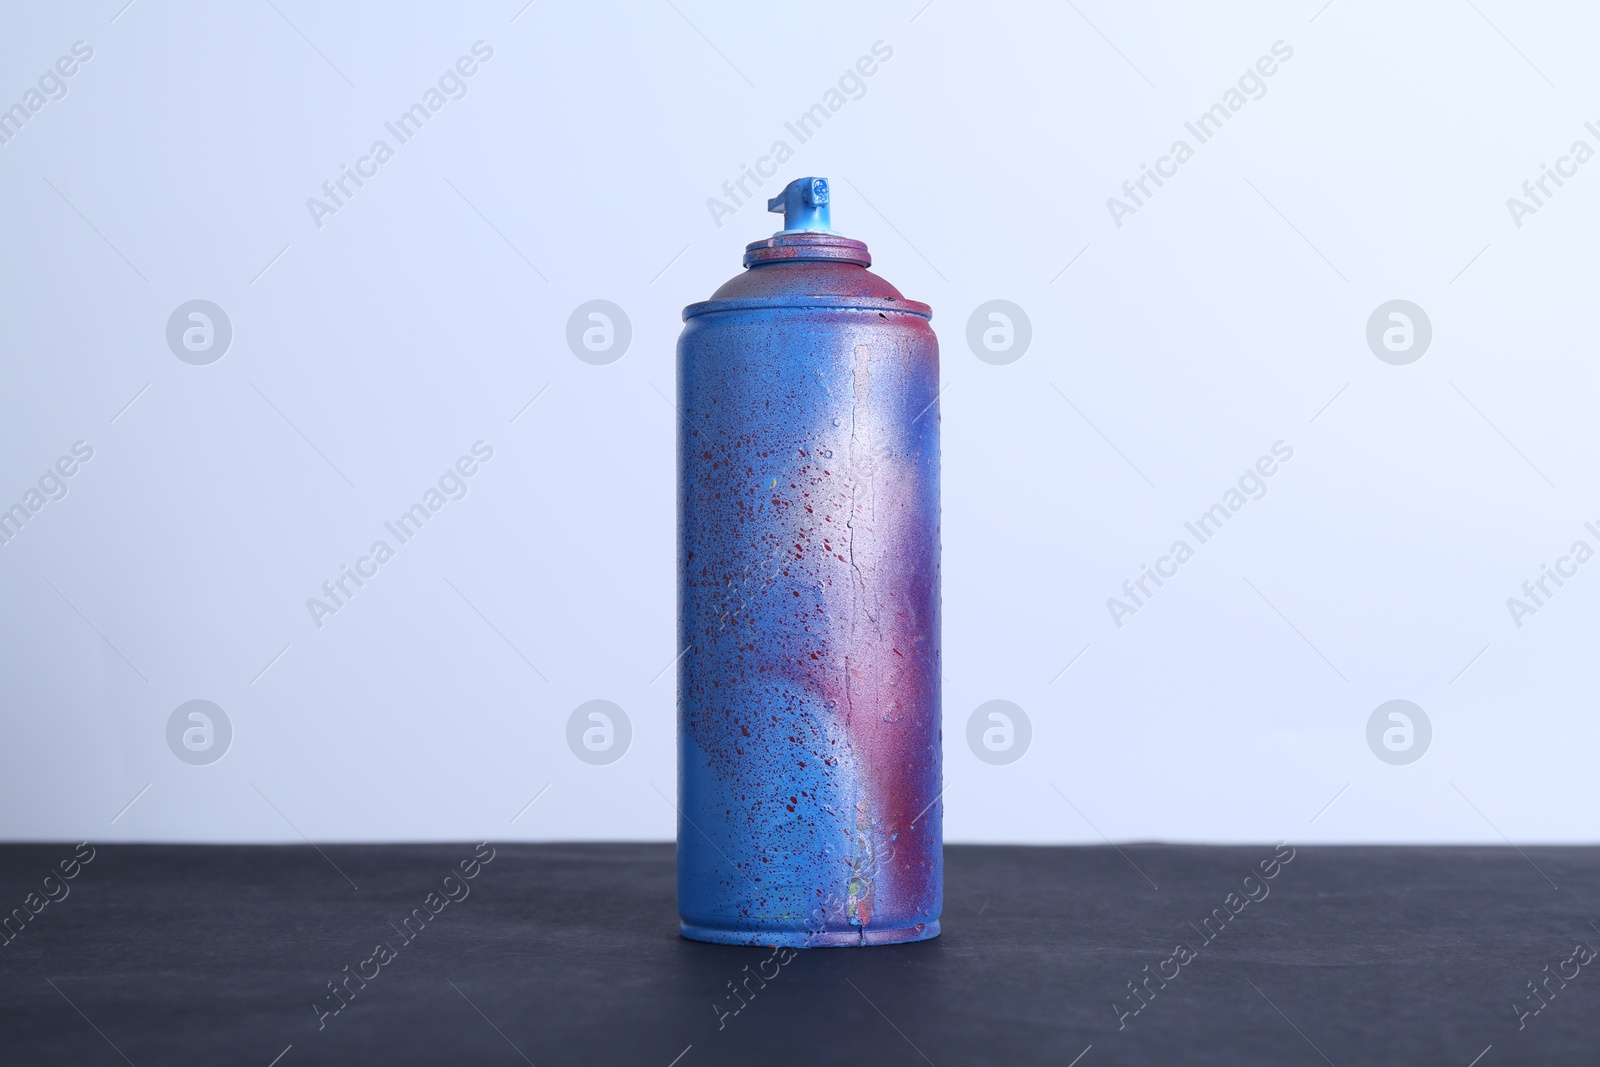 Photo of Spray paint can on black surface against white background